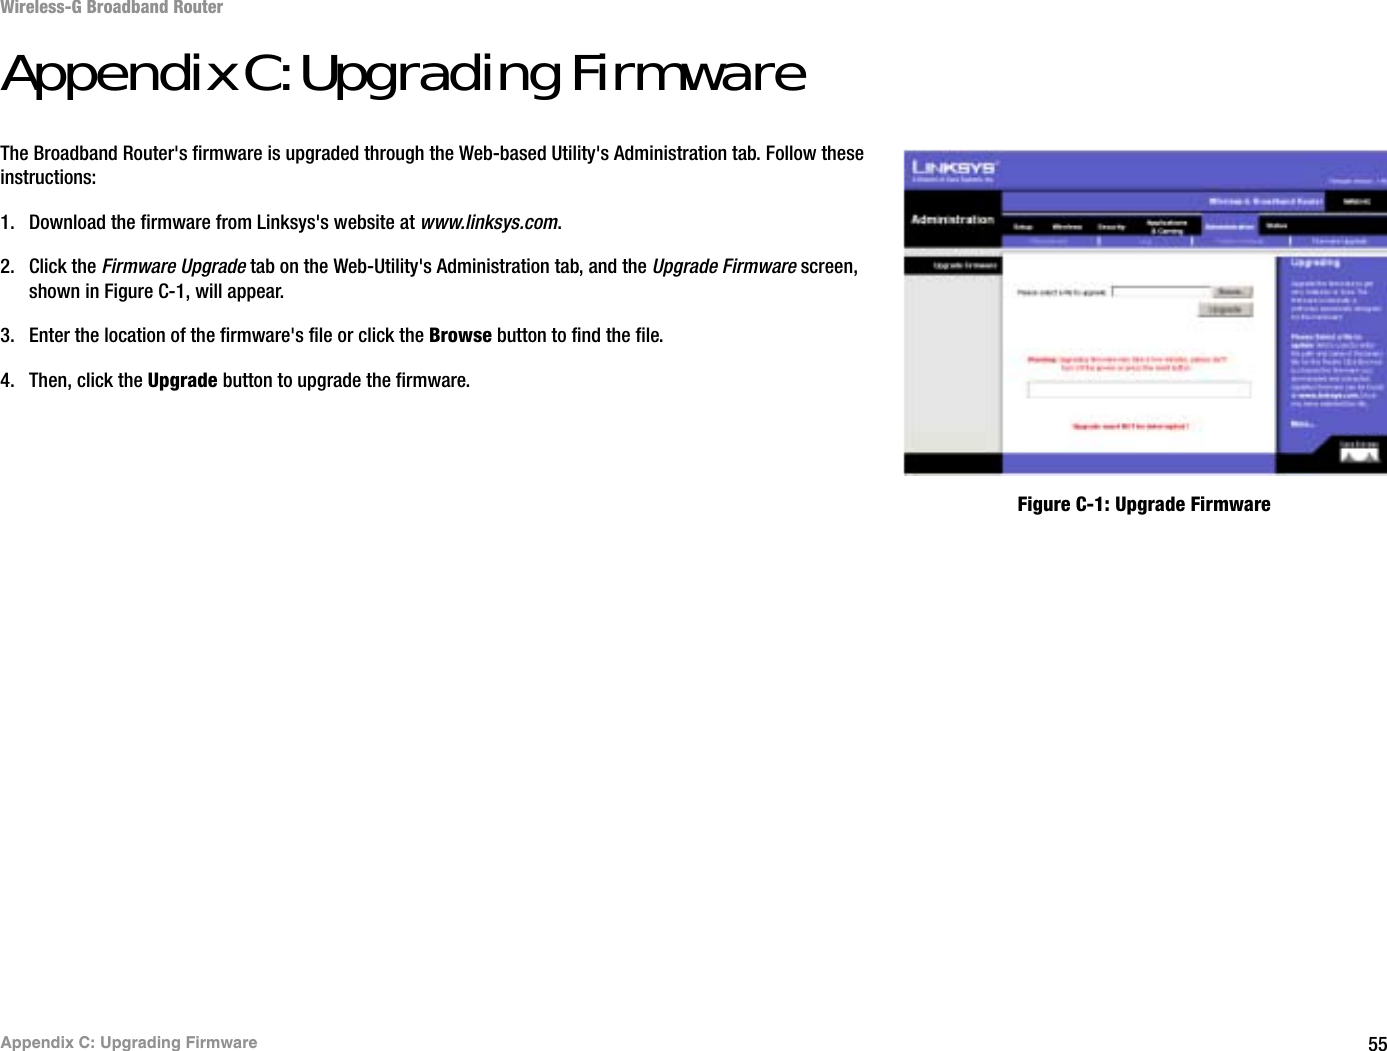 55Appendix C: Upgrading FirmwareWireless-G Broadband RouterAppendix C: Upgrading FirmwareThe Broadband Router&apos;s firmware is upgraded through the Web-based Utility&apos;s Administration tab. Follow these instructions:1. Download the firmware from Linksys&apos;s website at www.linksys.com.2. Click the Firmware Upgrade tab on the Web-Utility&apos;s Administration tab, and the Upgrade Firmware screen, shown in Figure C-1, will appear.3. Enter the location of the firmware&apos;s file or click the Browse button to find the file. 4. Then, click the Upgrade button to upgrade the firmware.Figure C-1: Upgrade Firmware